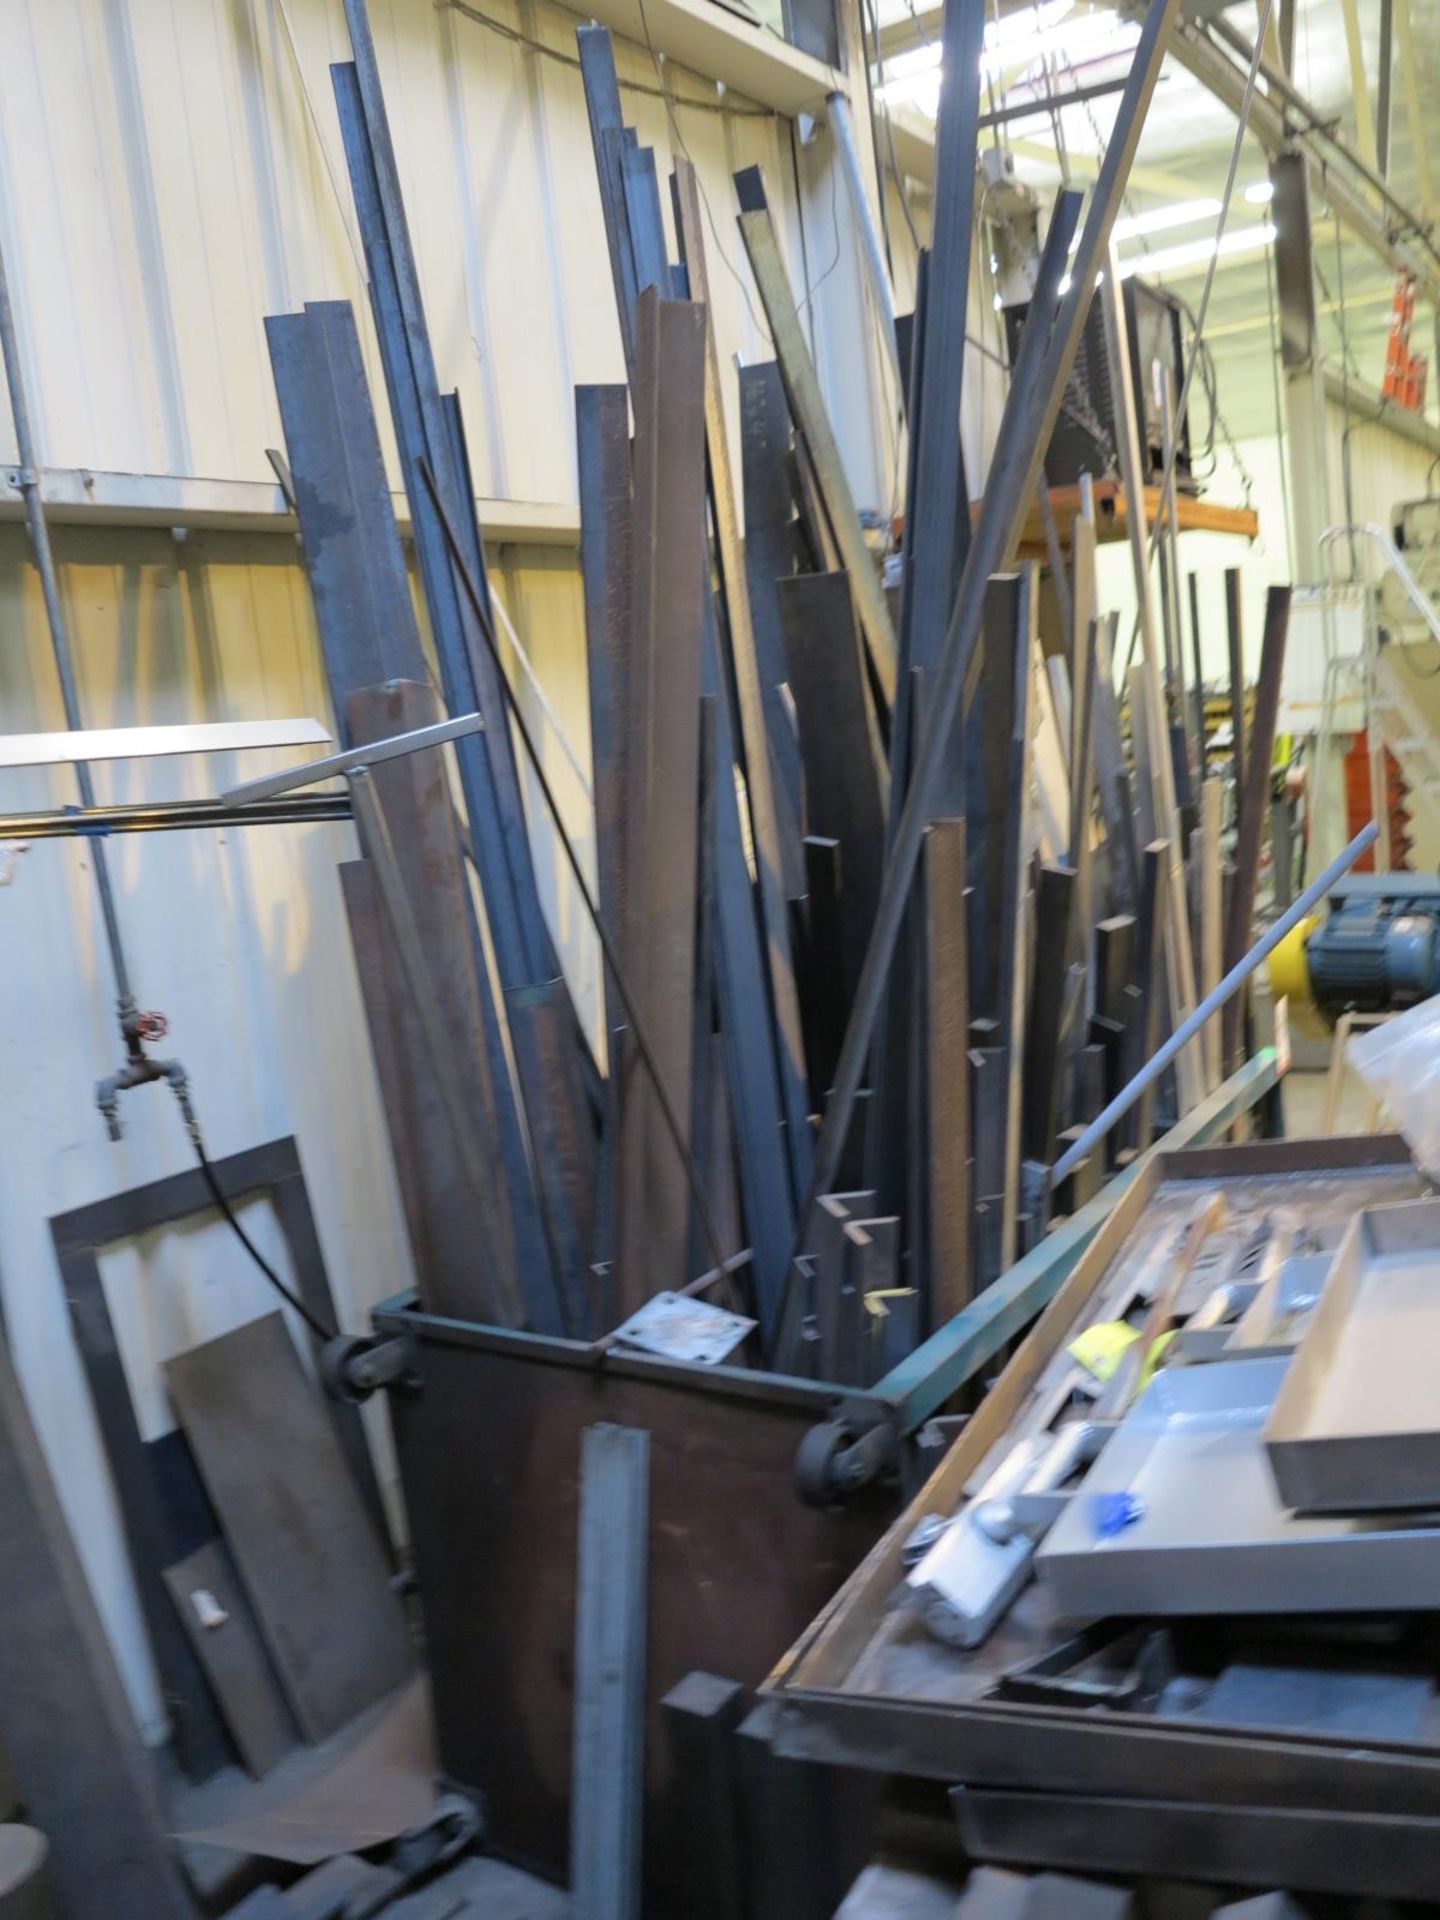 LOT - 6' X 3' RACK OF USEABLE LENGTHS OF STEEL BAR, CHANNEL, ANGLE, PIPE, ALUMINUM, S.S. ROUNDS, - Image 3 of 3